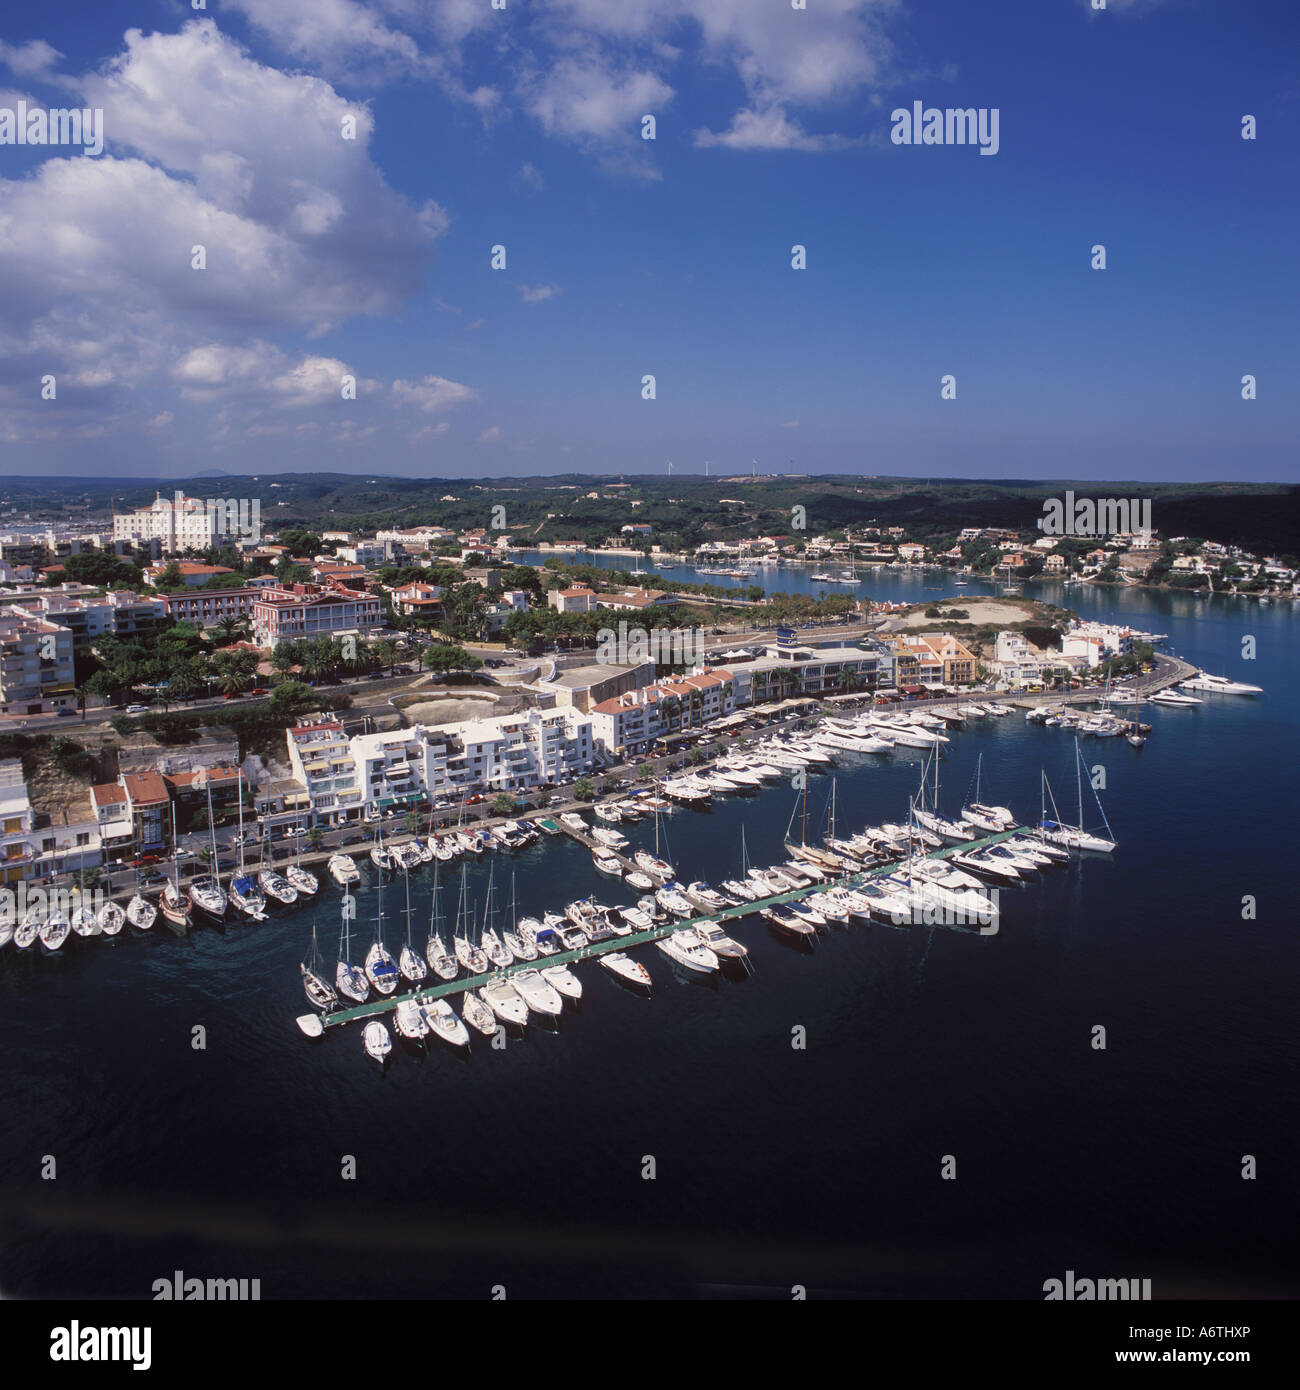 Aerial image - looking North East over the marina and berths of the Real Club Nautica de Mahon, Menorca Stock Photo